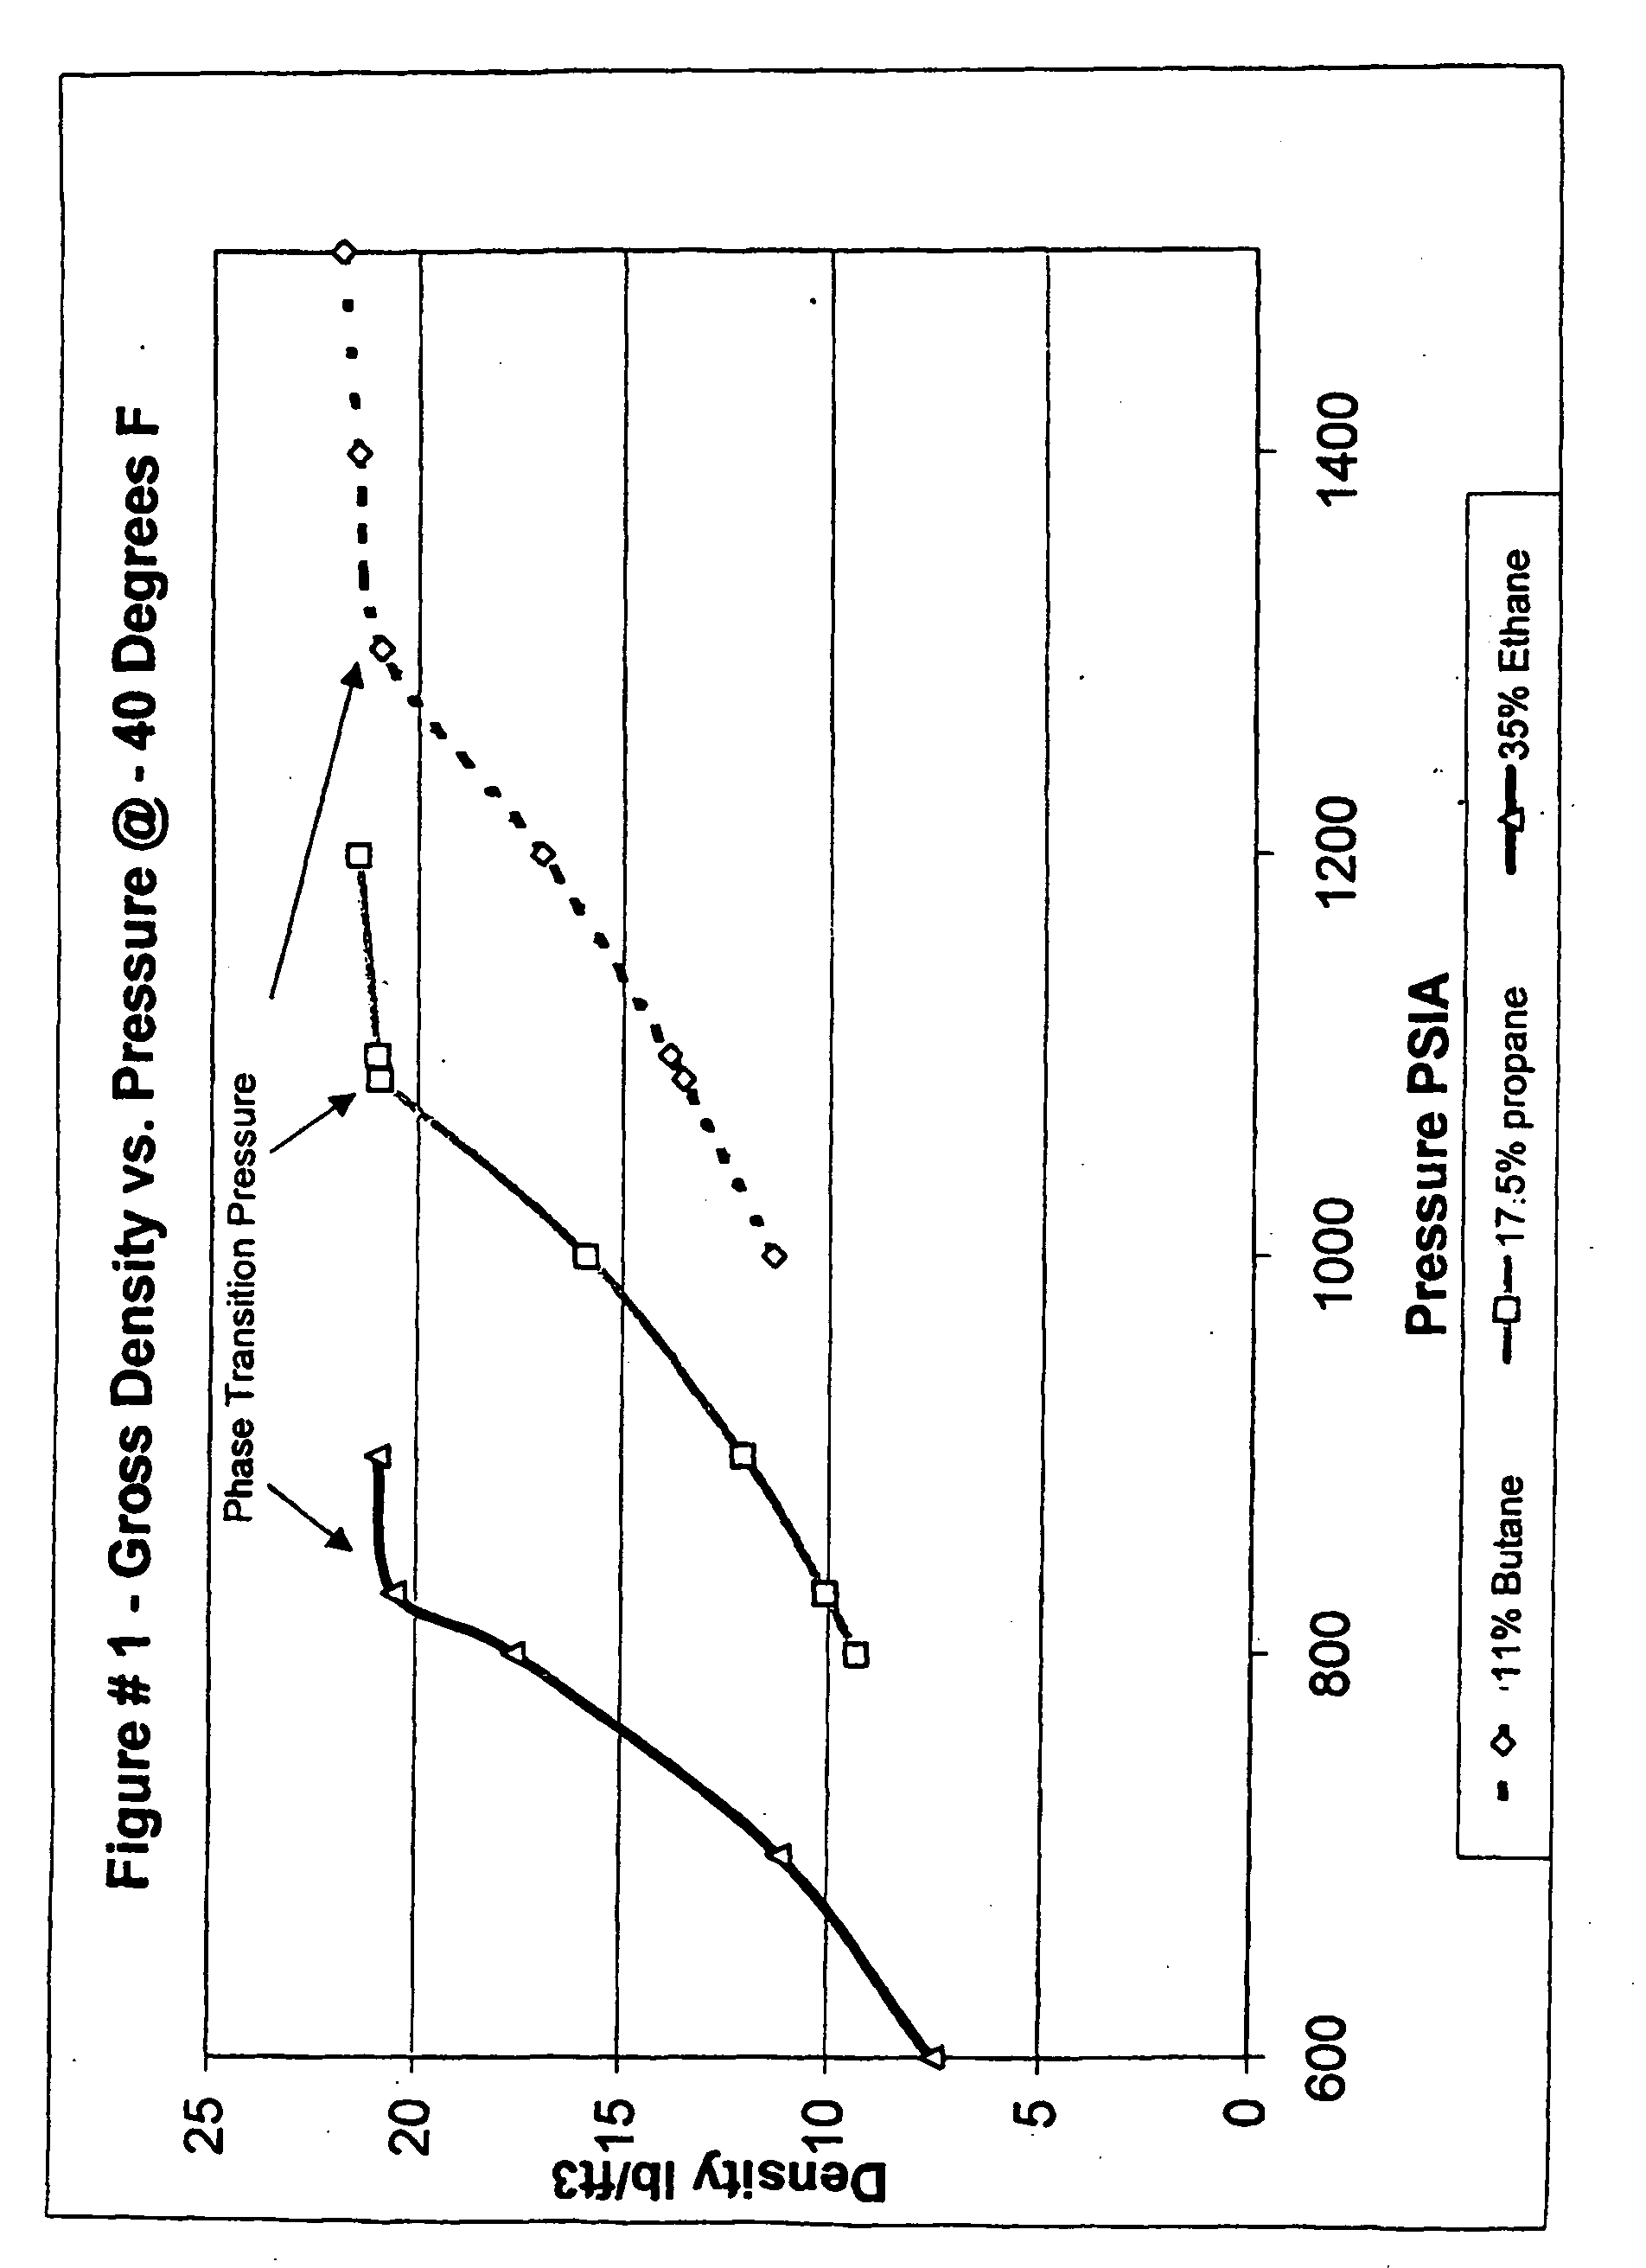 Method and substance for refrigerated natural gas transport